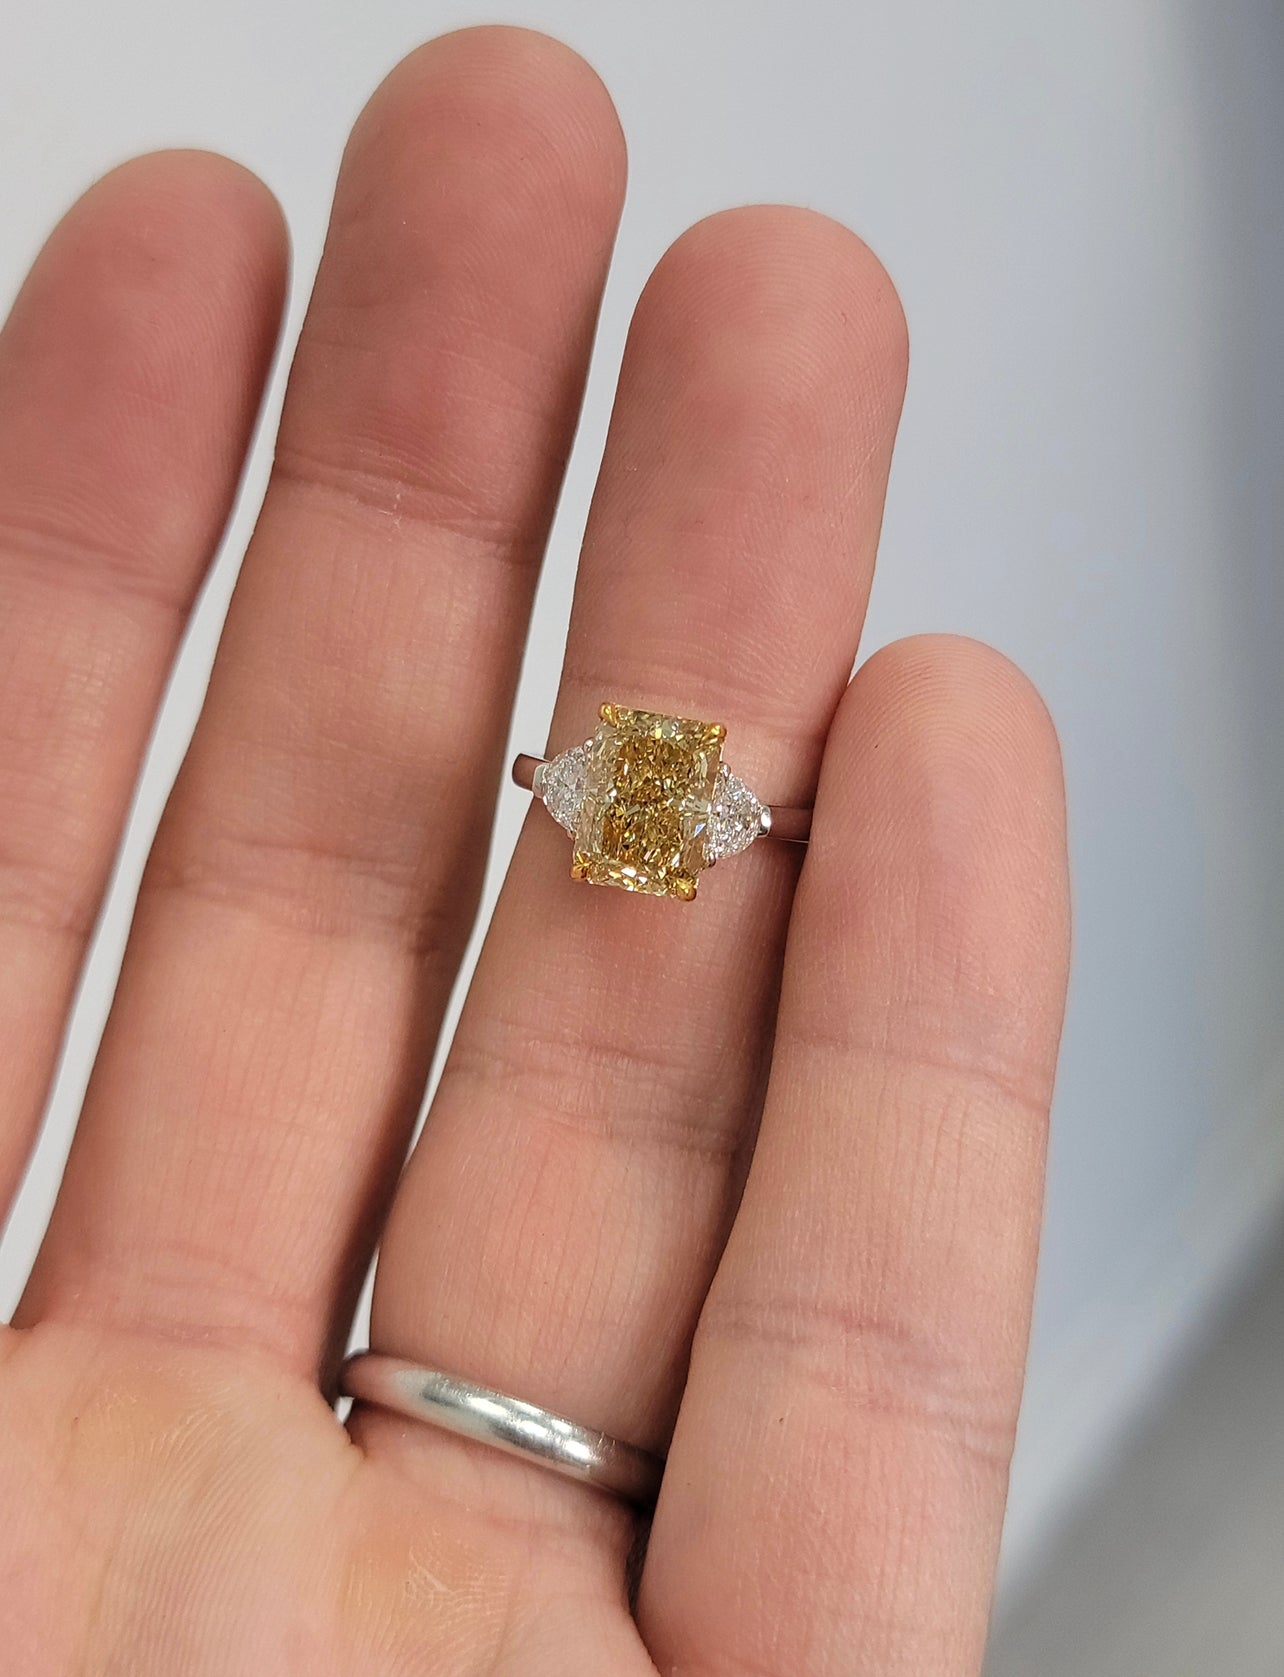 3.04ct Fancy Brownish Yellow Radiant VS1 GIA Ring